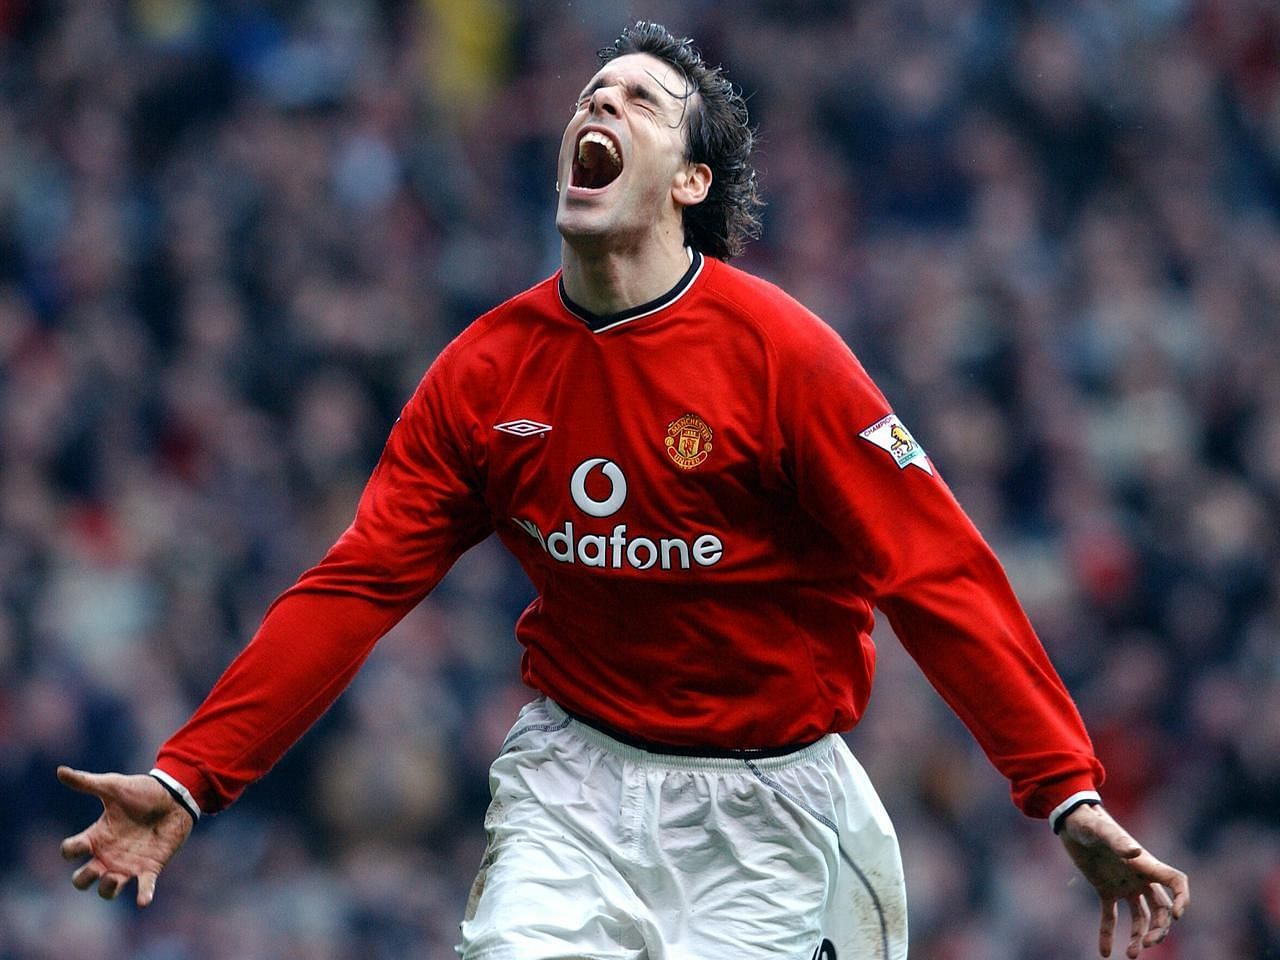 Ruud van Nistelrooy is a three-time Champions League top scorer